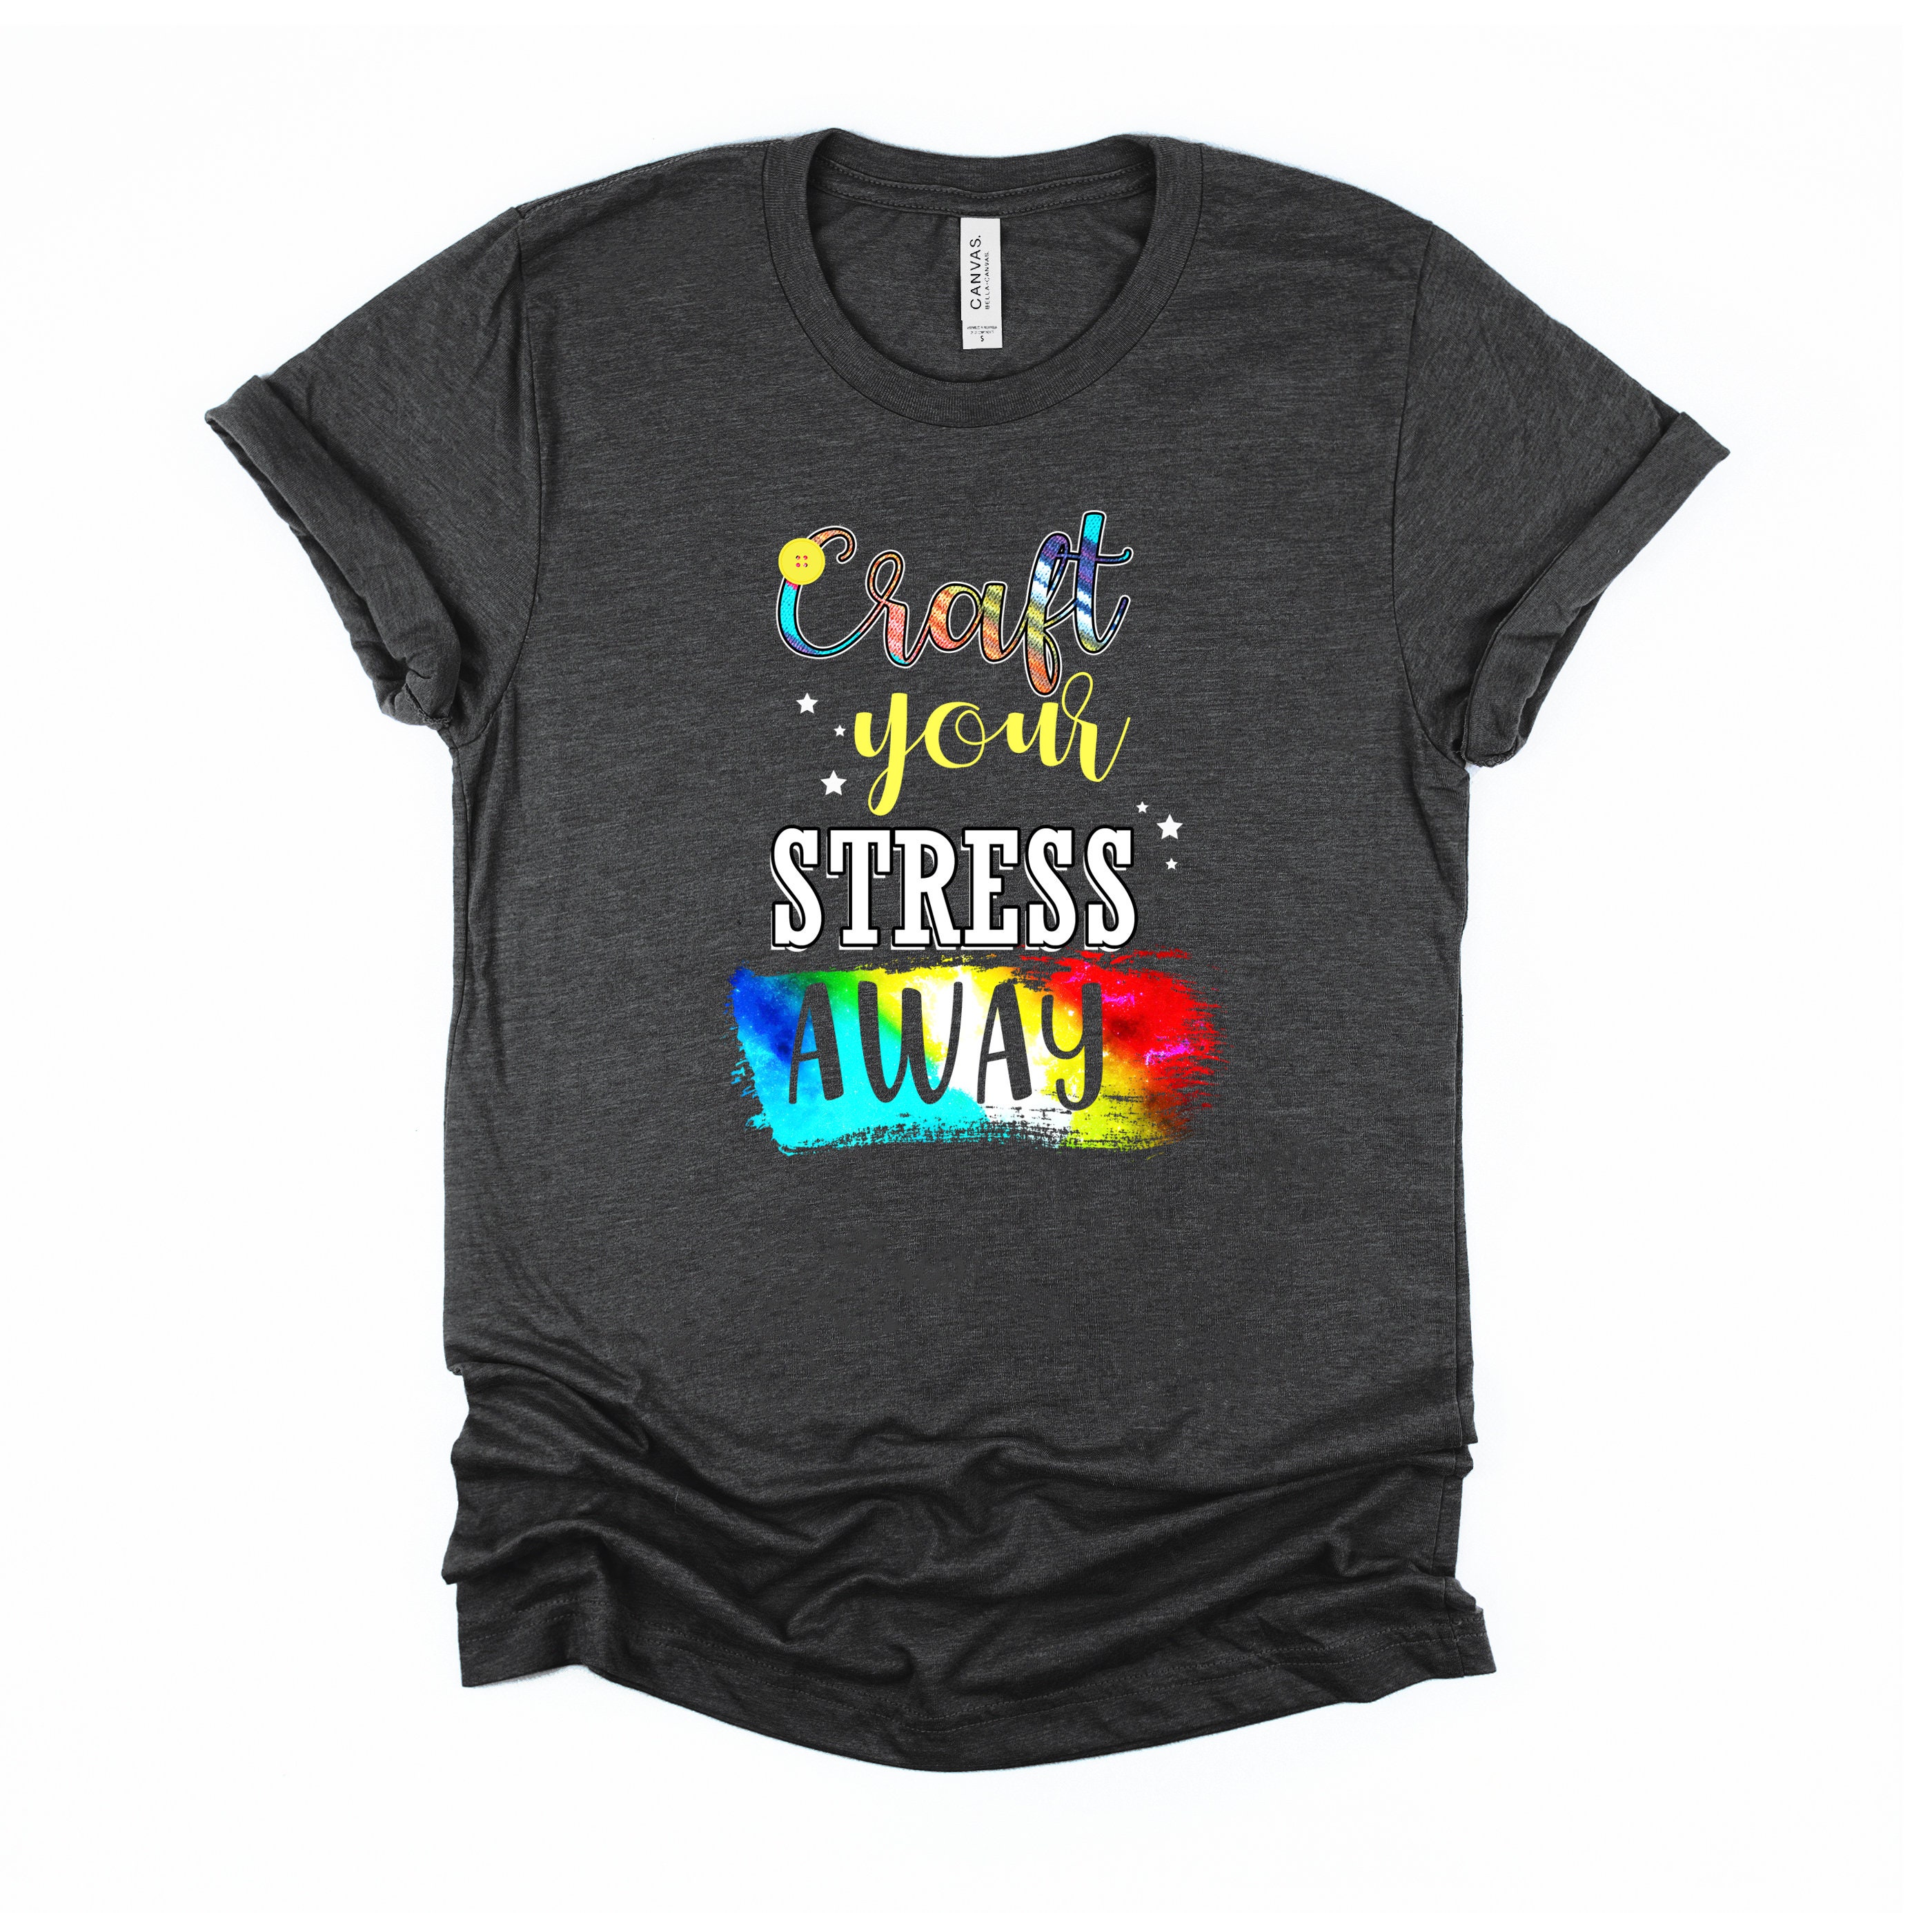 Buy Craft Your Stress Away Tshirt, Funny Crafting Shirt, Gift for